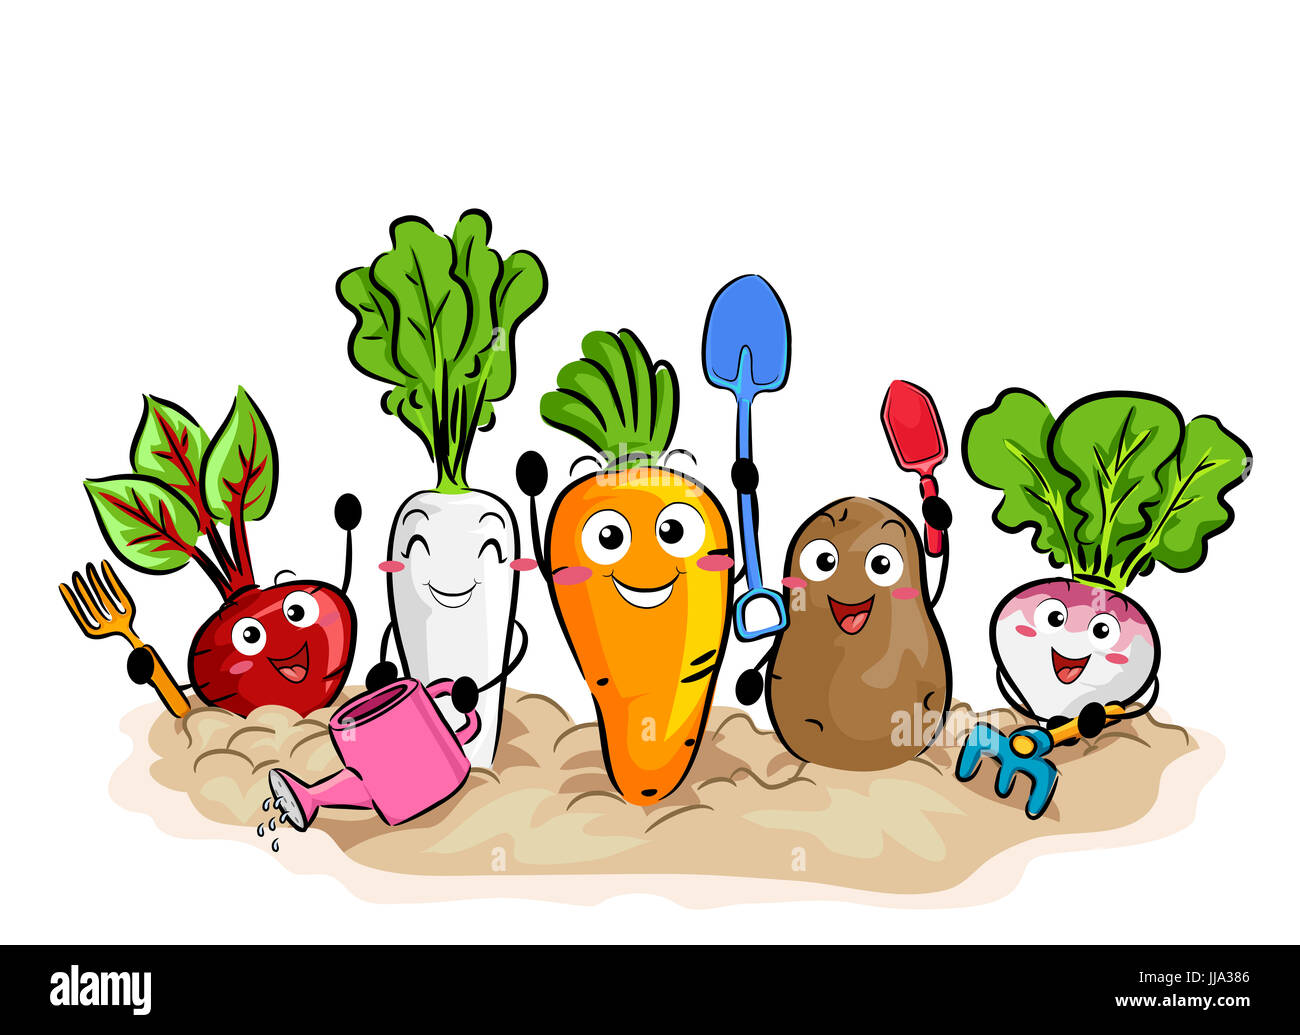 Colorful Illustration Featuring Happy Vegetables Using Different Gardening Tools Stock Photo